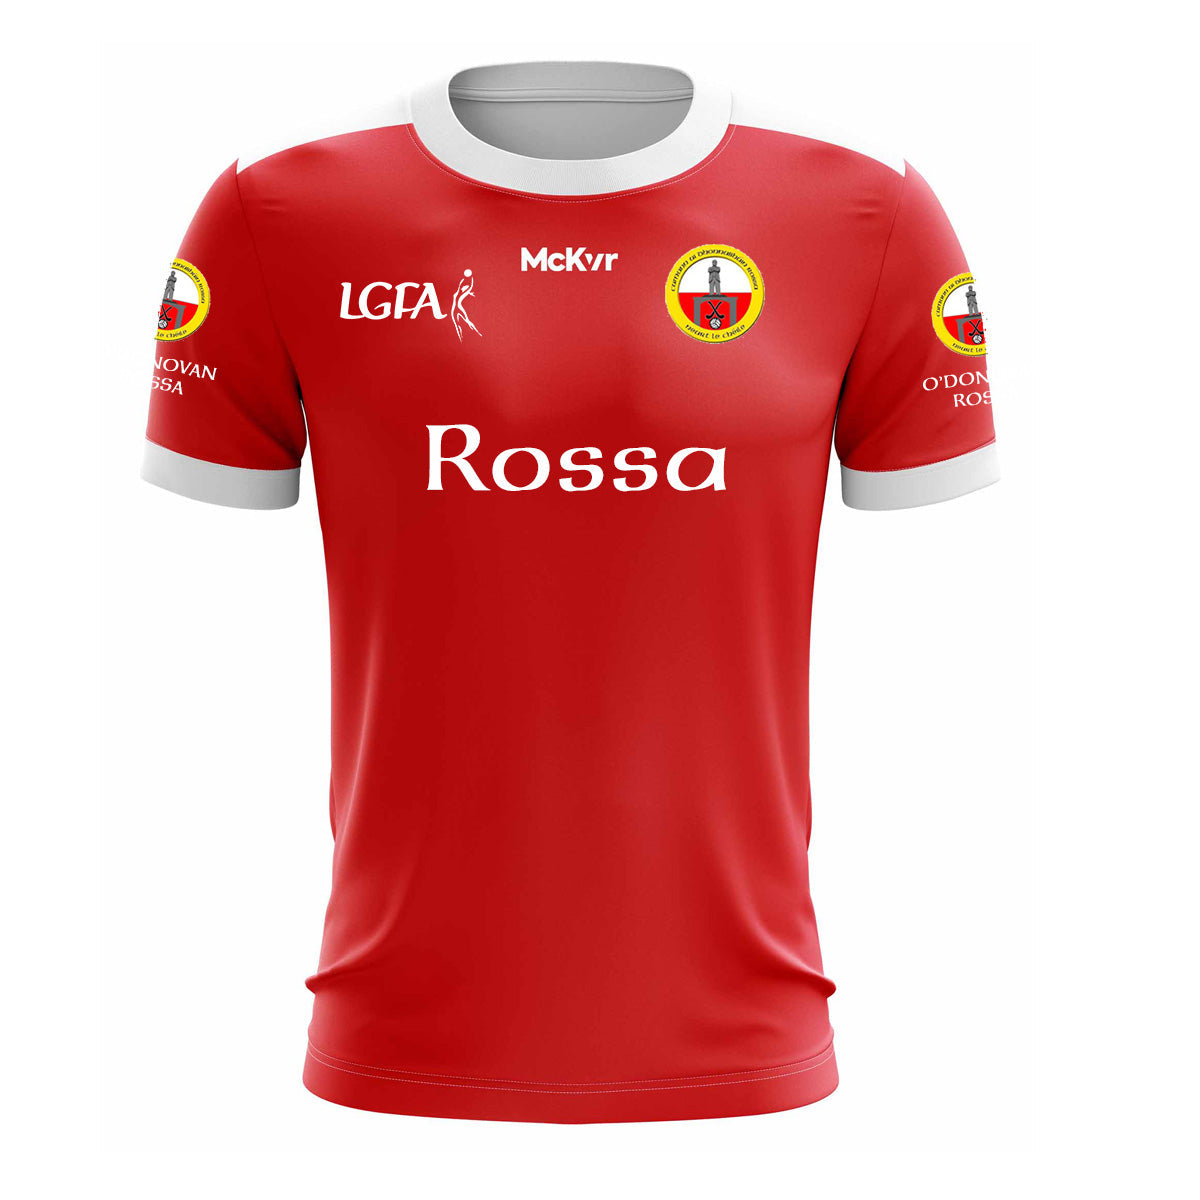 Mc Keever O'Donovan Rossa LGFA Playing Jersey - Womens - Red/White